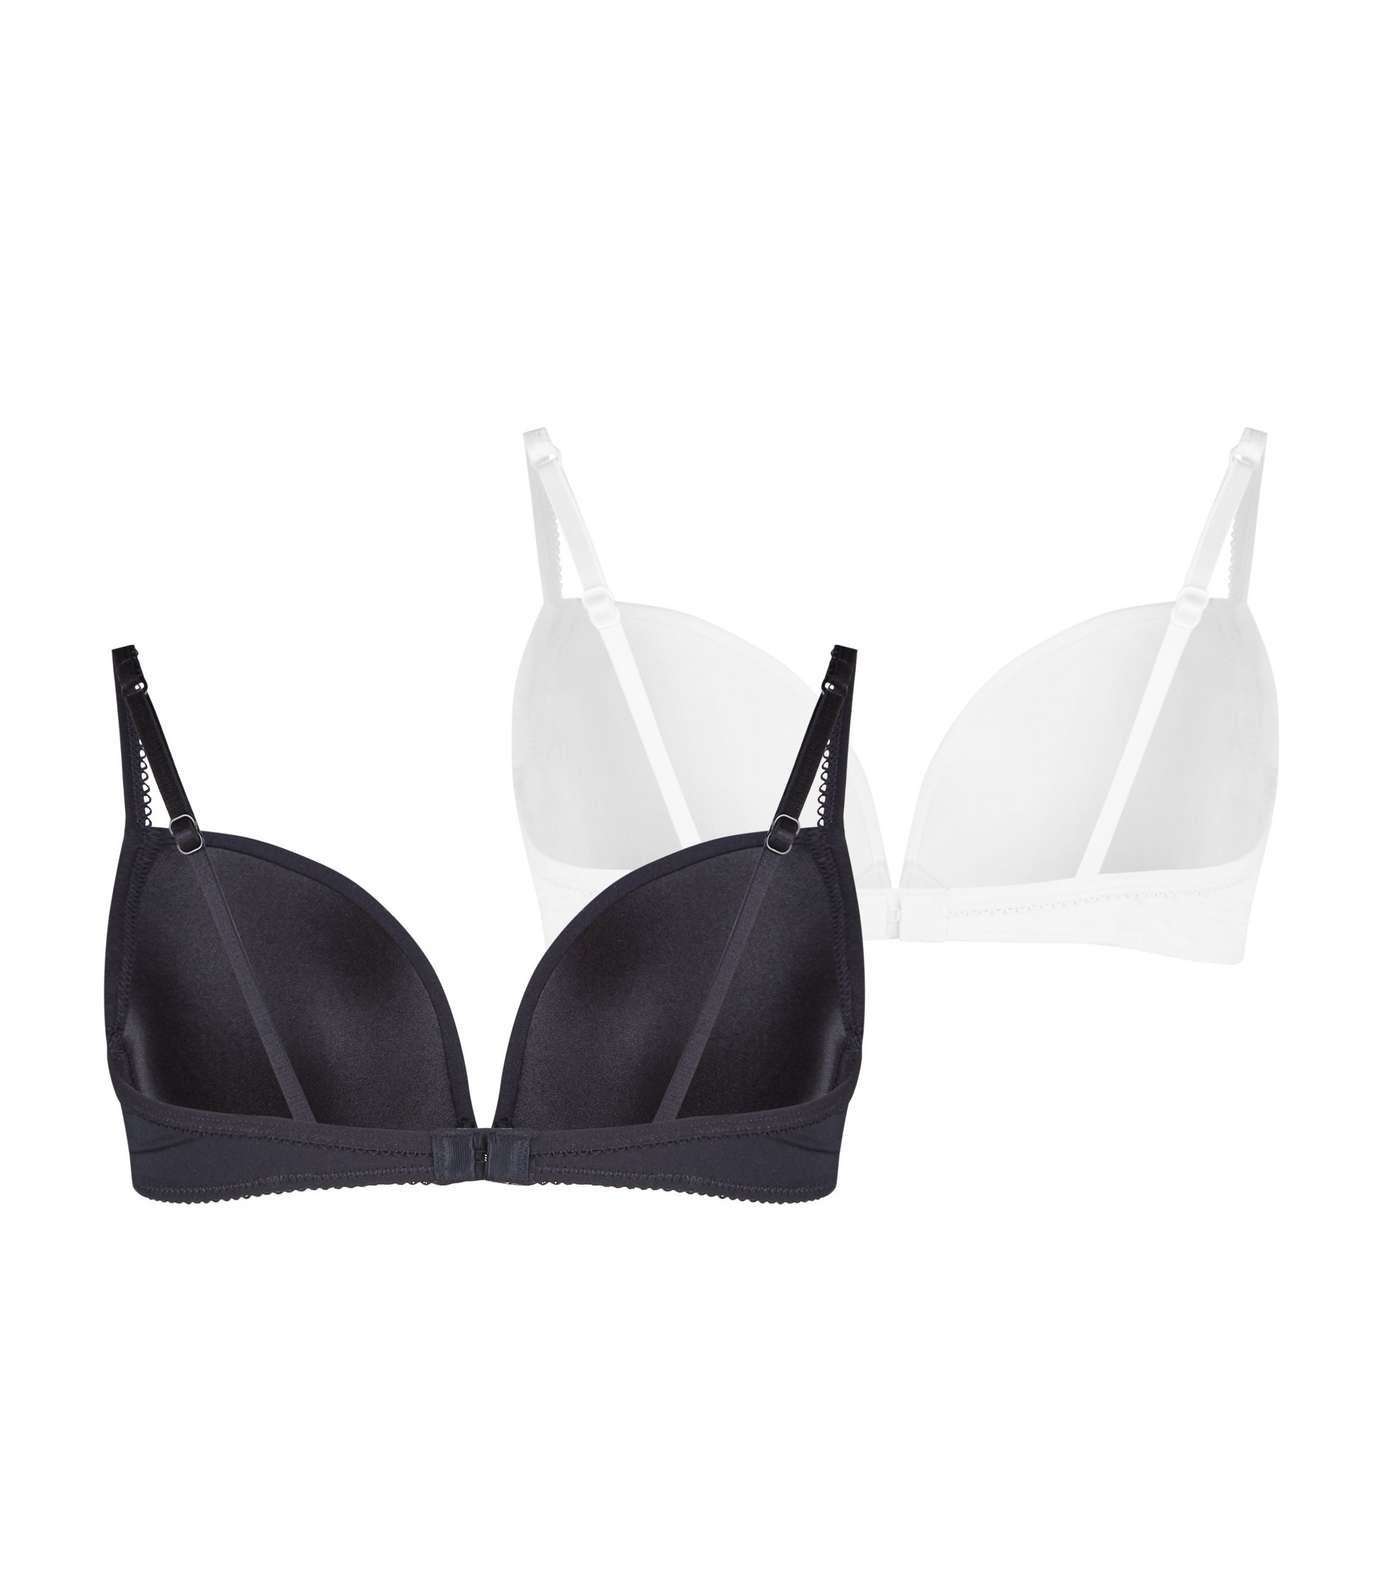 Girls 2 Pack Black and White Wired Bras Image 2